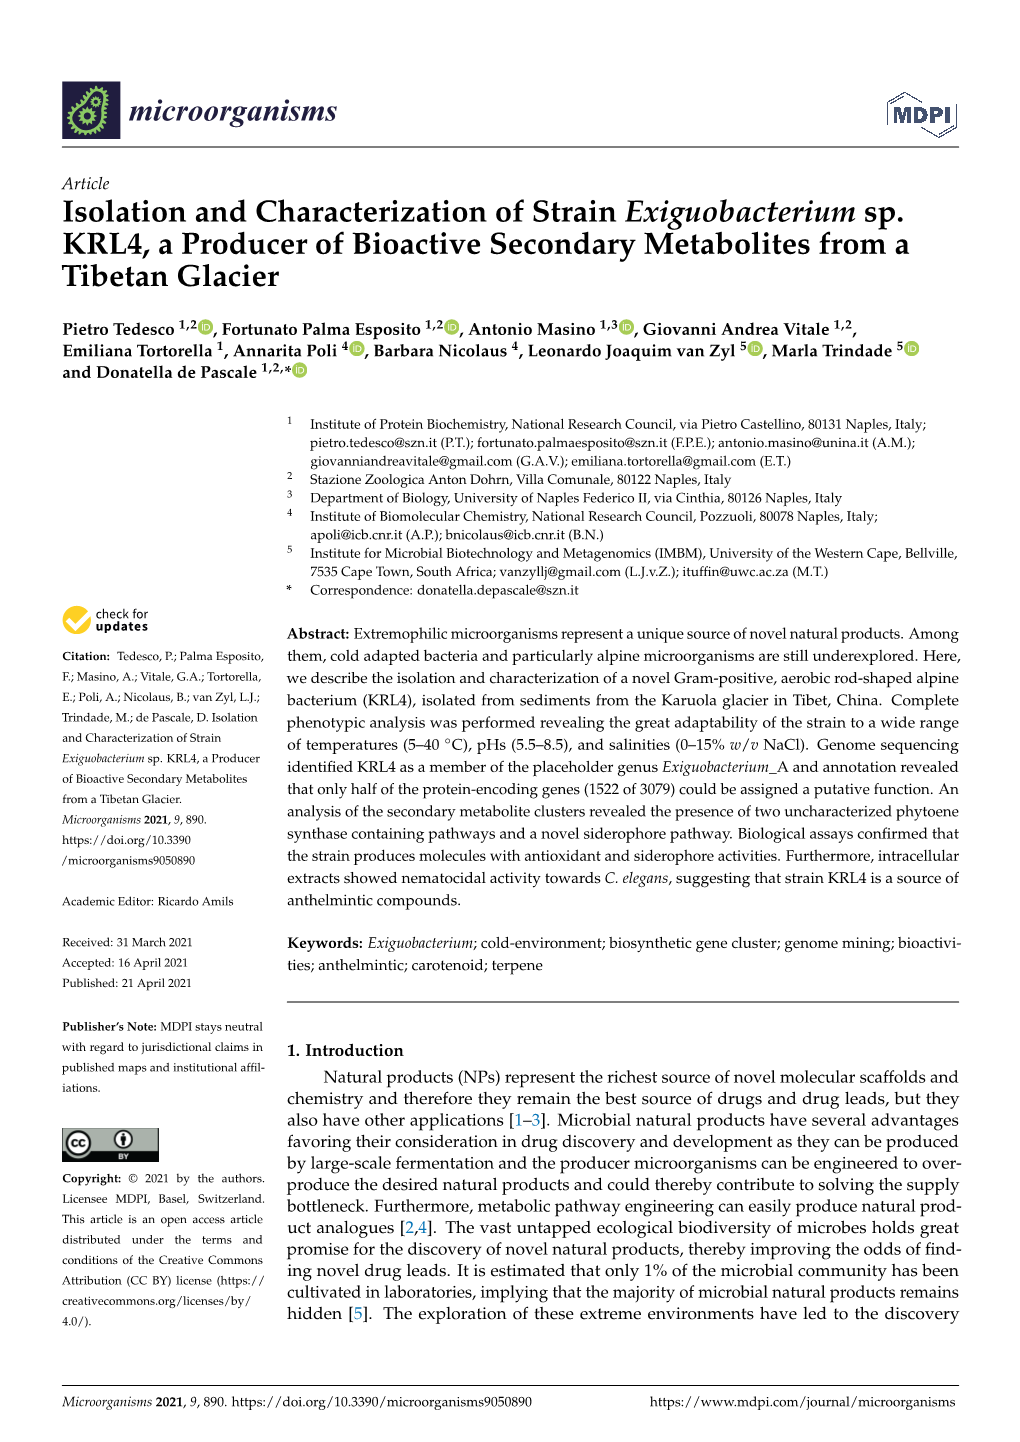 Isolation and Characterization of Strain Exiguobacterium Sp. KRL4, a Producer of Bioactive Secondary Metabolites from a Tibetan Glacier